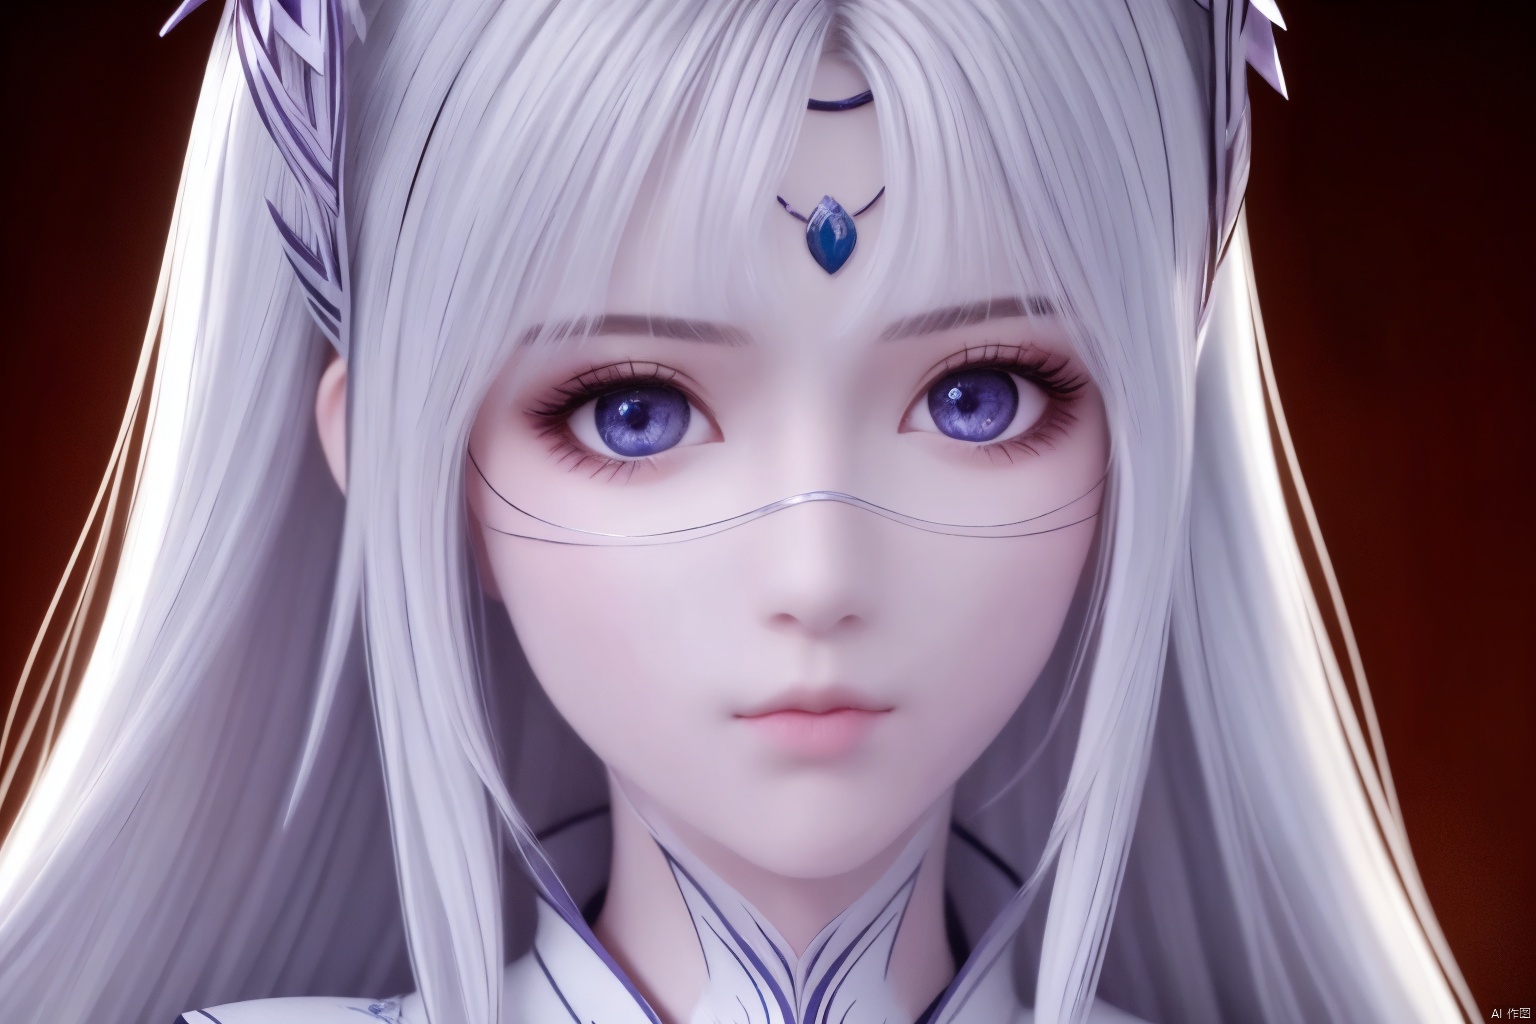 1 girl,best quality,details face,depth of field,perfect detail,white long hair,details eyes